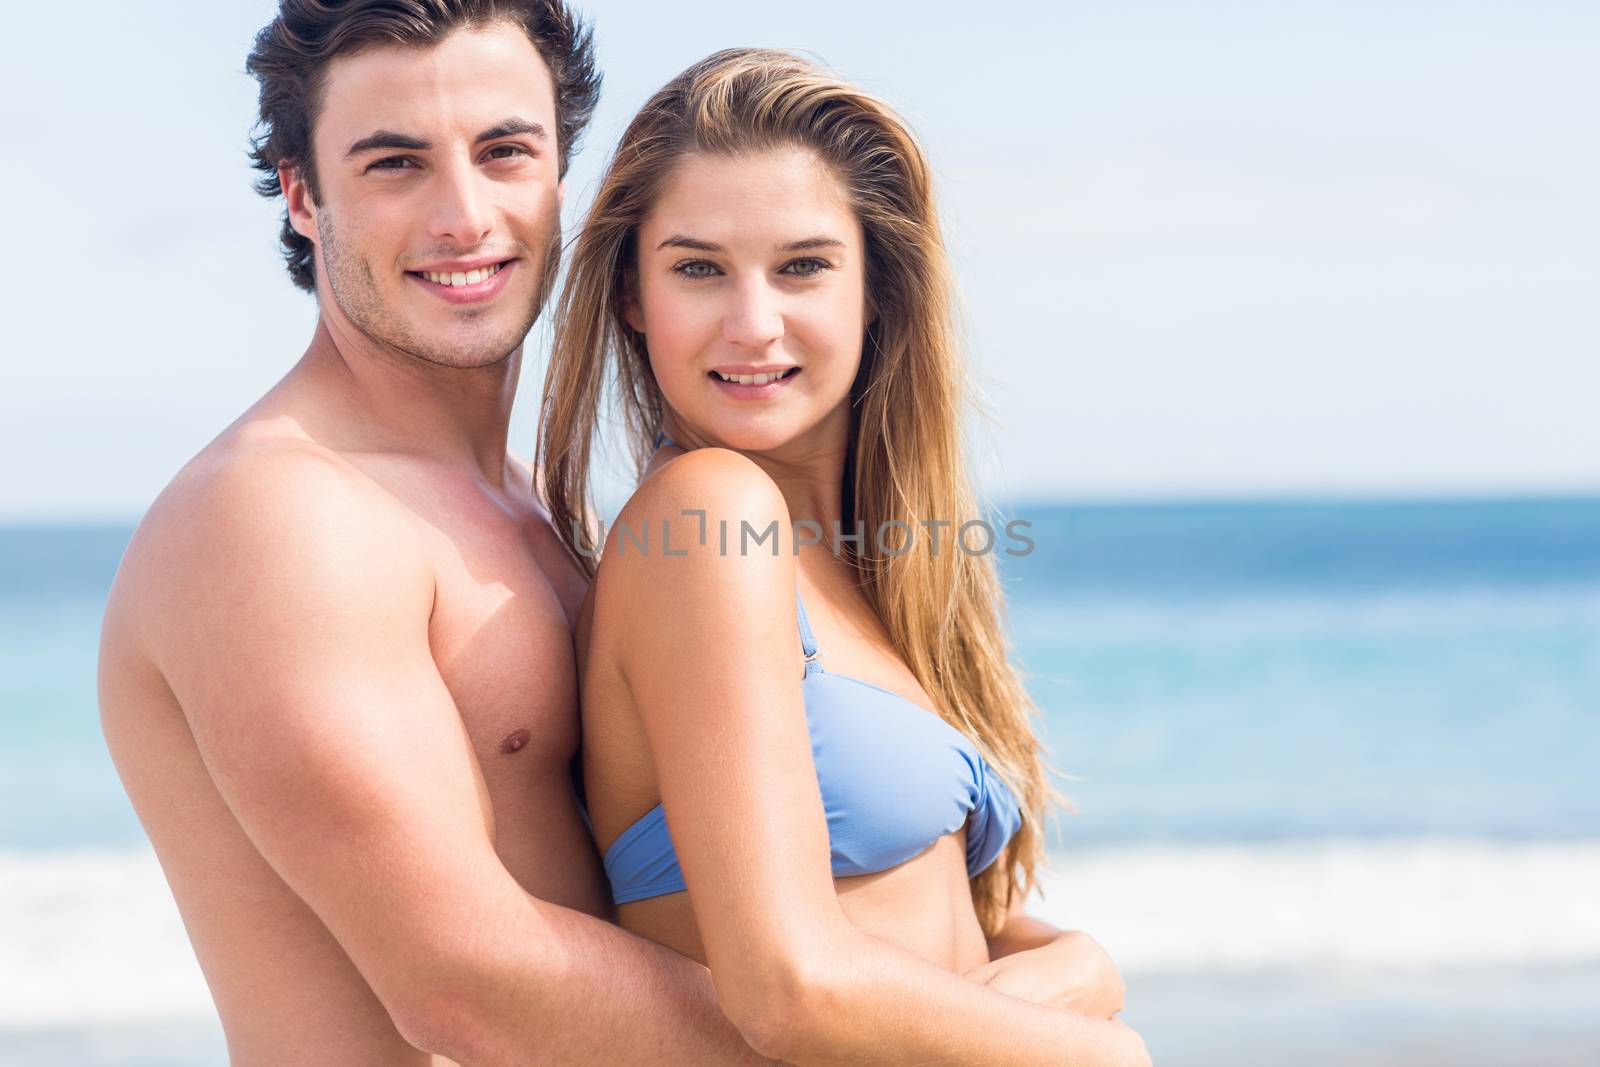 Happy couple in swimsuit looking at camera and embracing at the beach